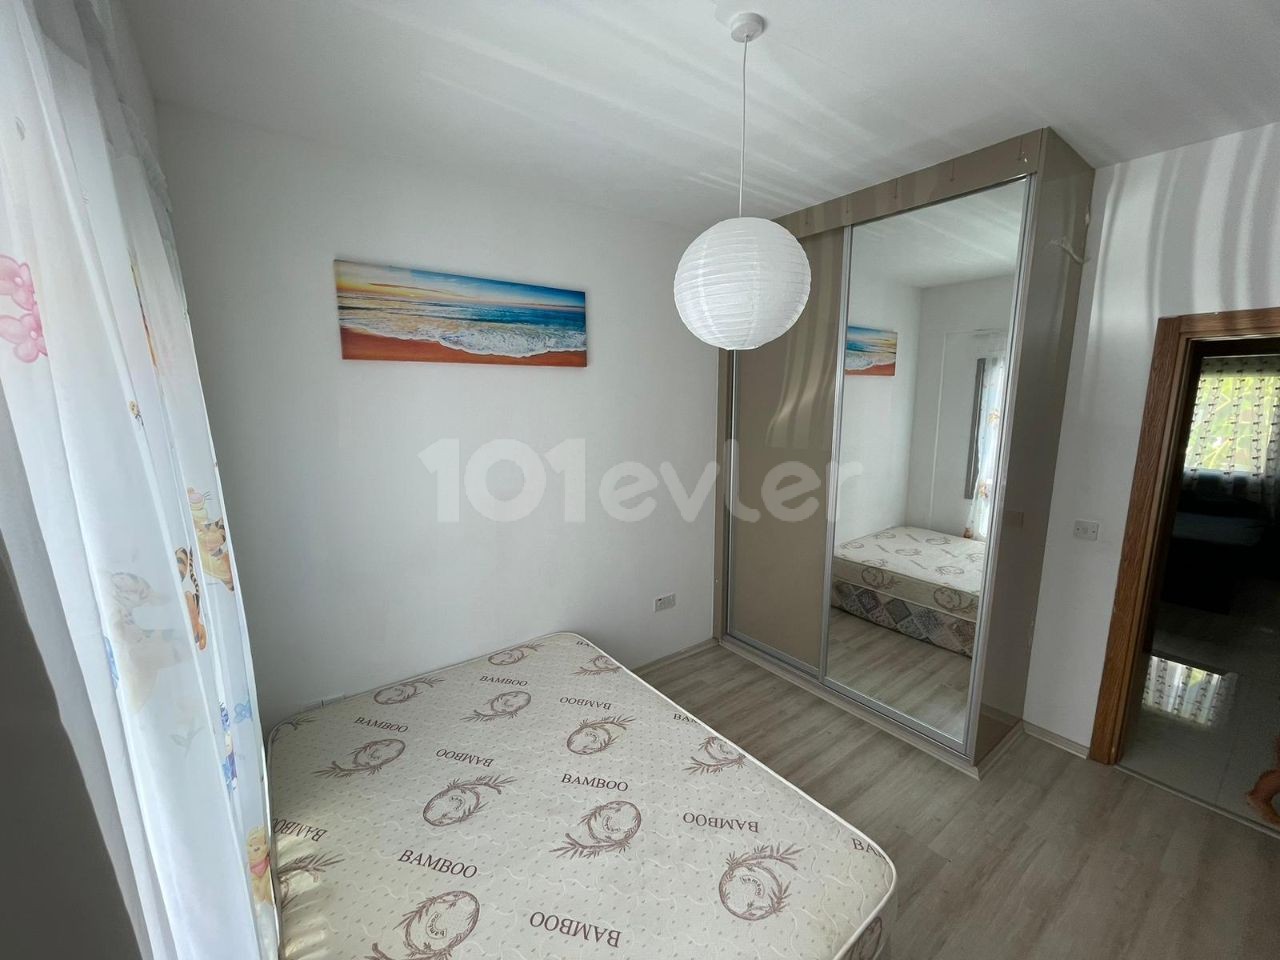 2+1 FLAT FOR RENT IN GIRNE OZANKÖY AREA!!!